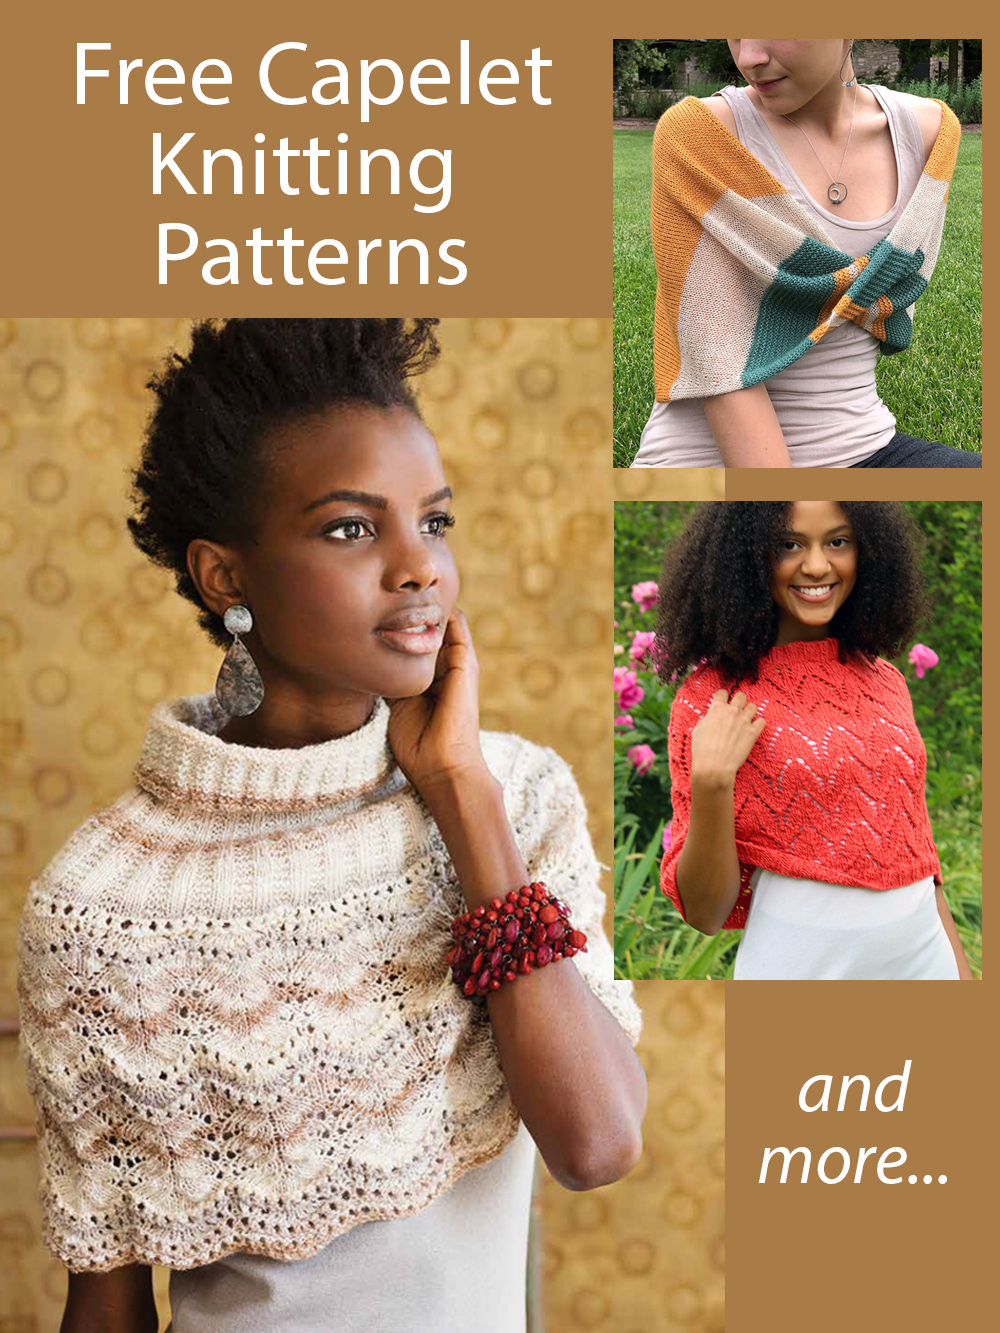 Free knitting patterns using plaited basketweave wicker woven cable stitches for baby sweaters and blankets, women's and men's sweaters, accessories, and more. Most patterns are free.